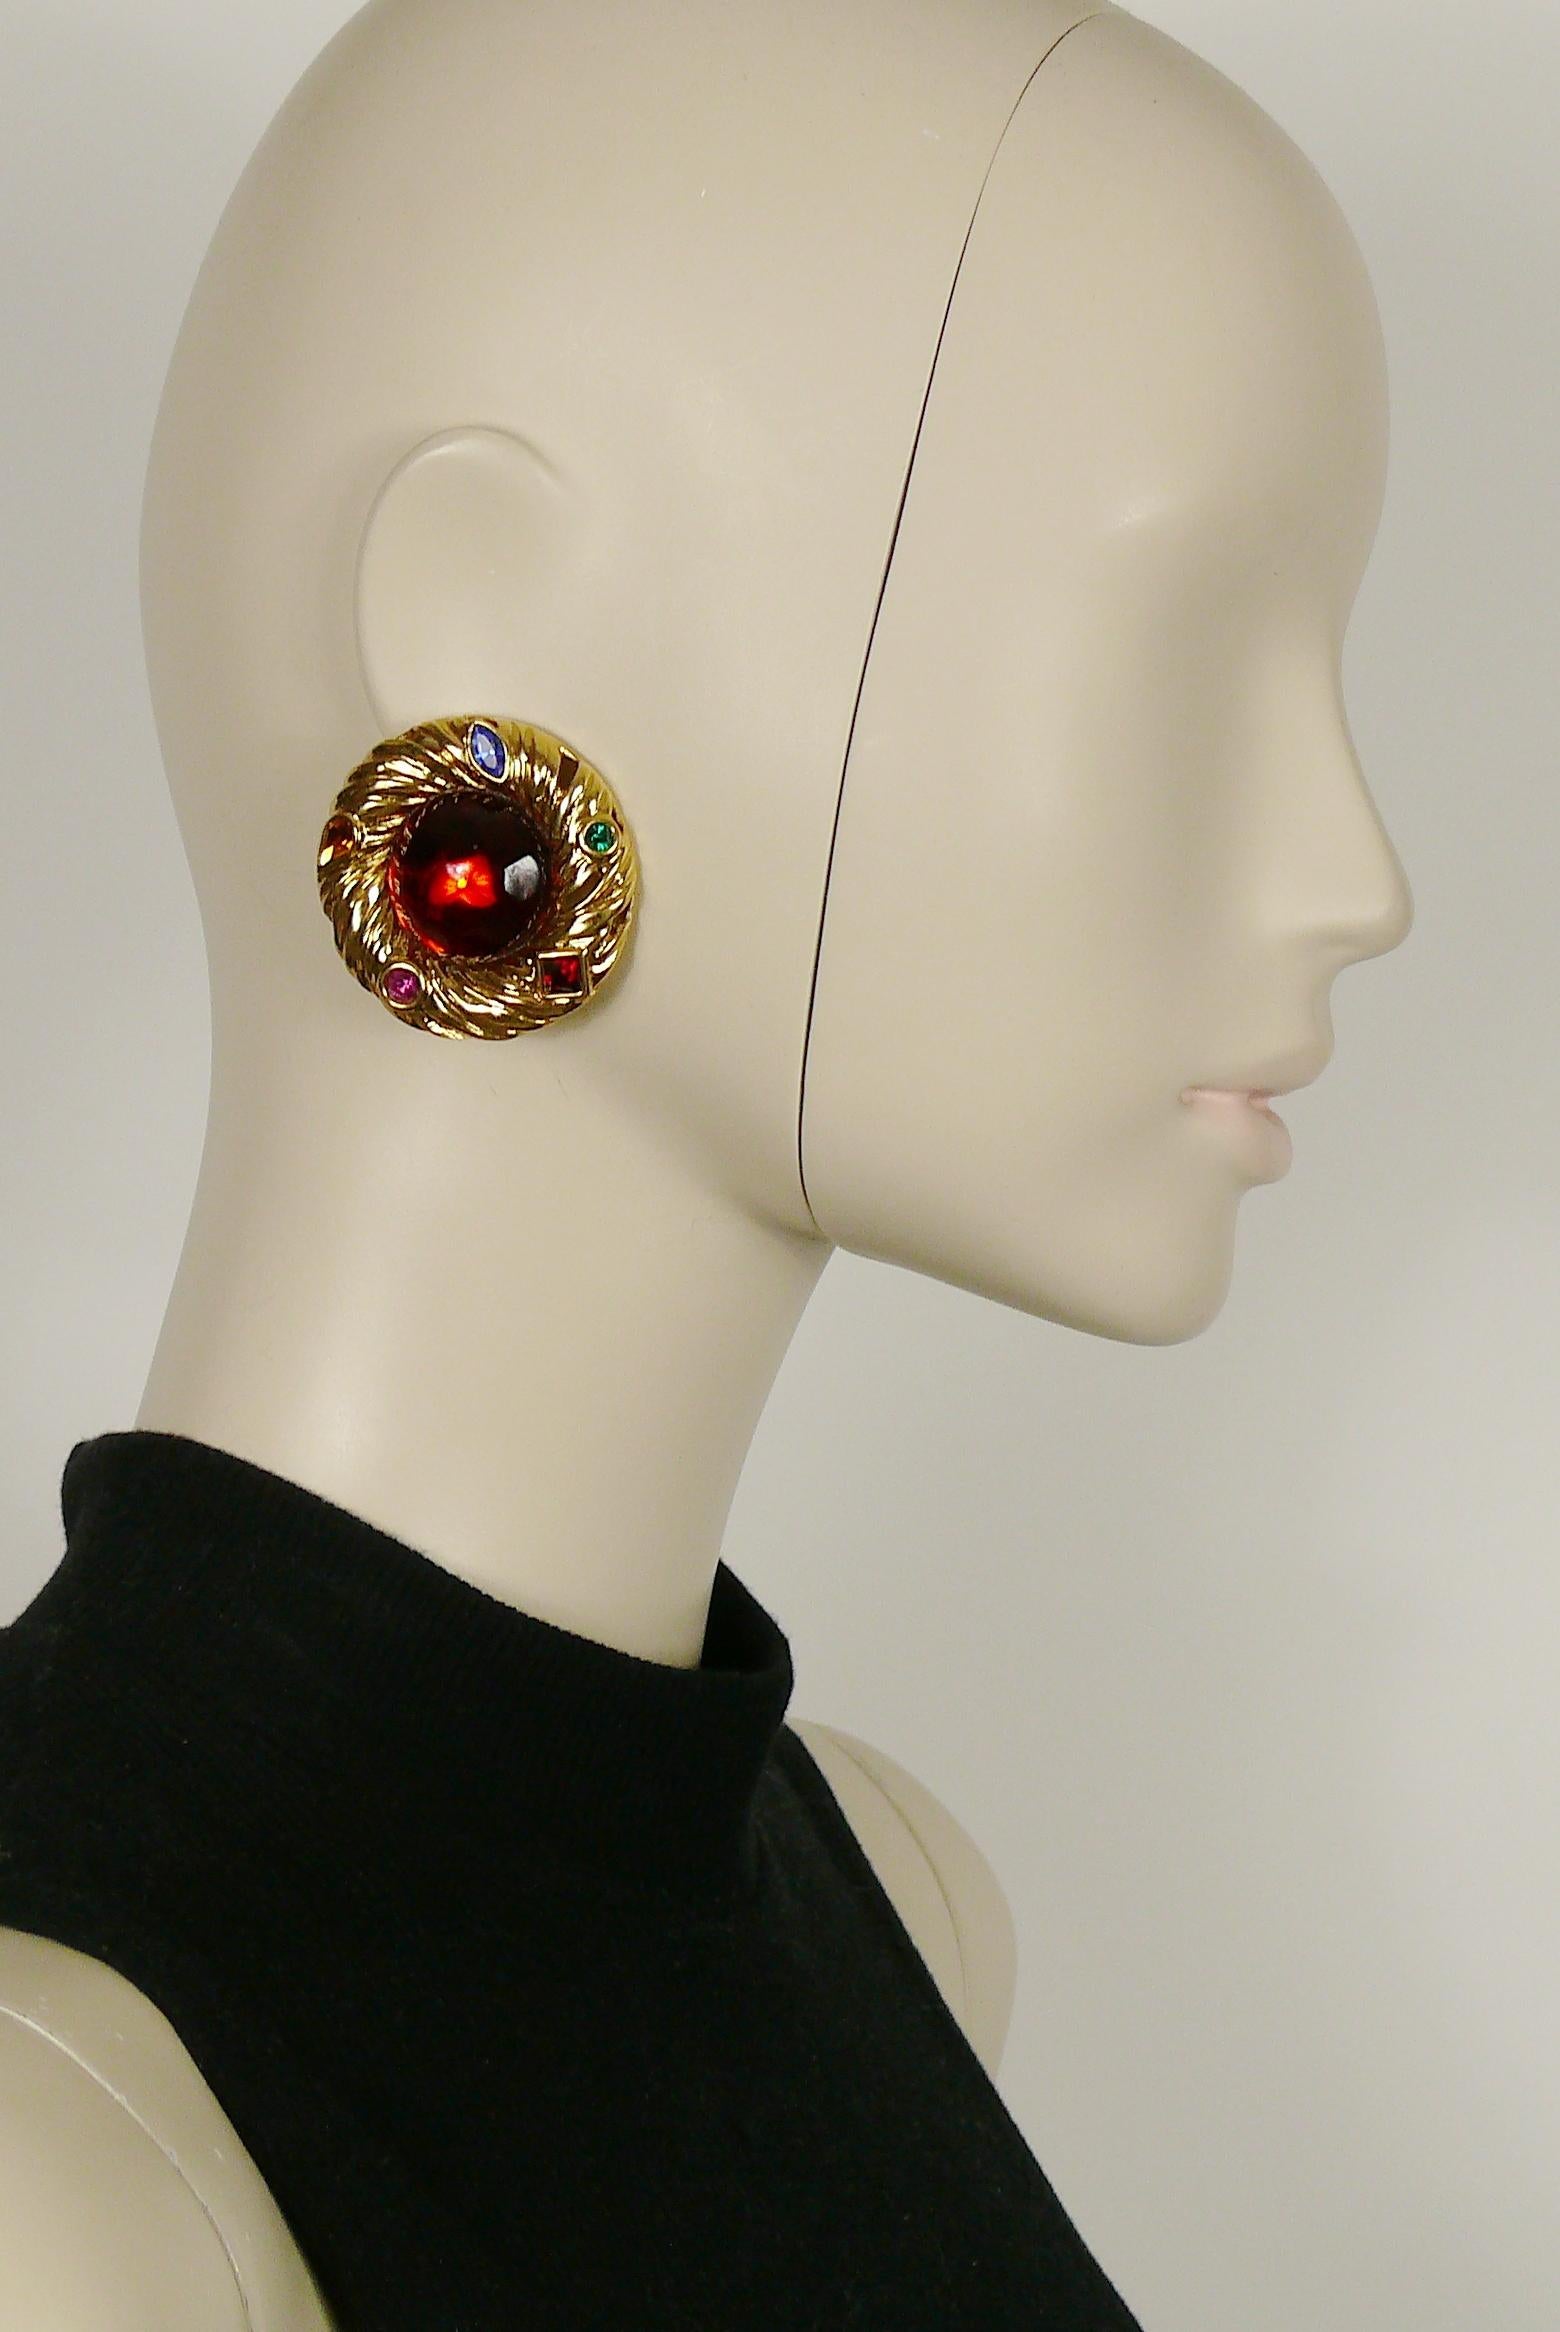 YVES SAINT LAURENT vintage gold toned nest design clip-on earrings featuring a large red resin cabochon center and multicolored crystals.

Embossed YSL Made in France.

Indicative measurements : diameter approx. 4.5 cm (1.77 inches).

NOTES
- This